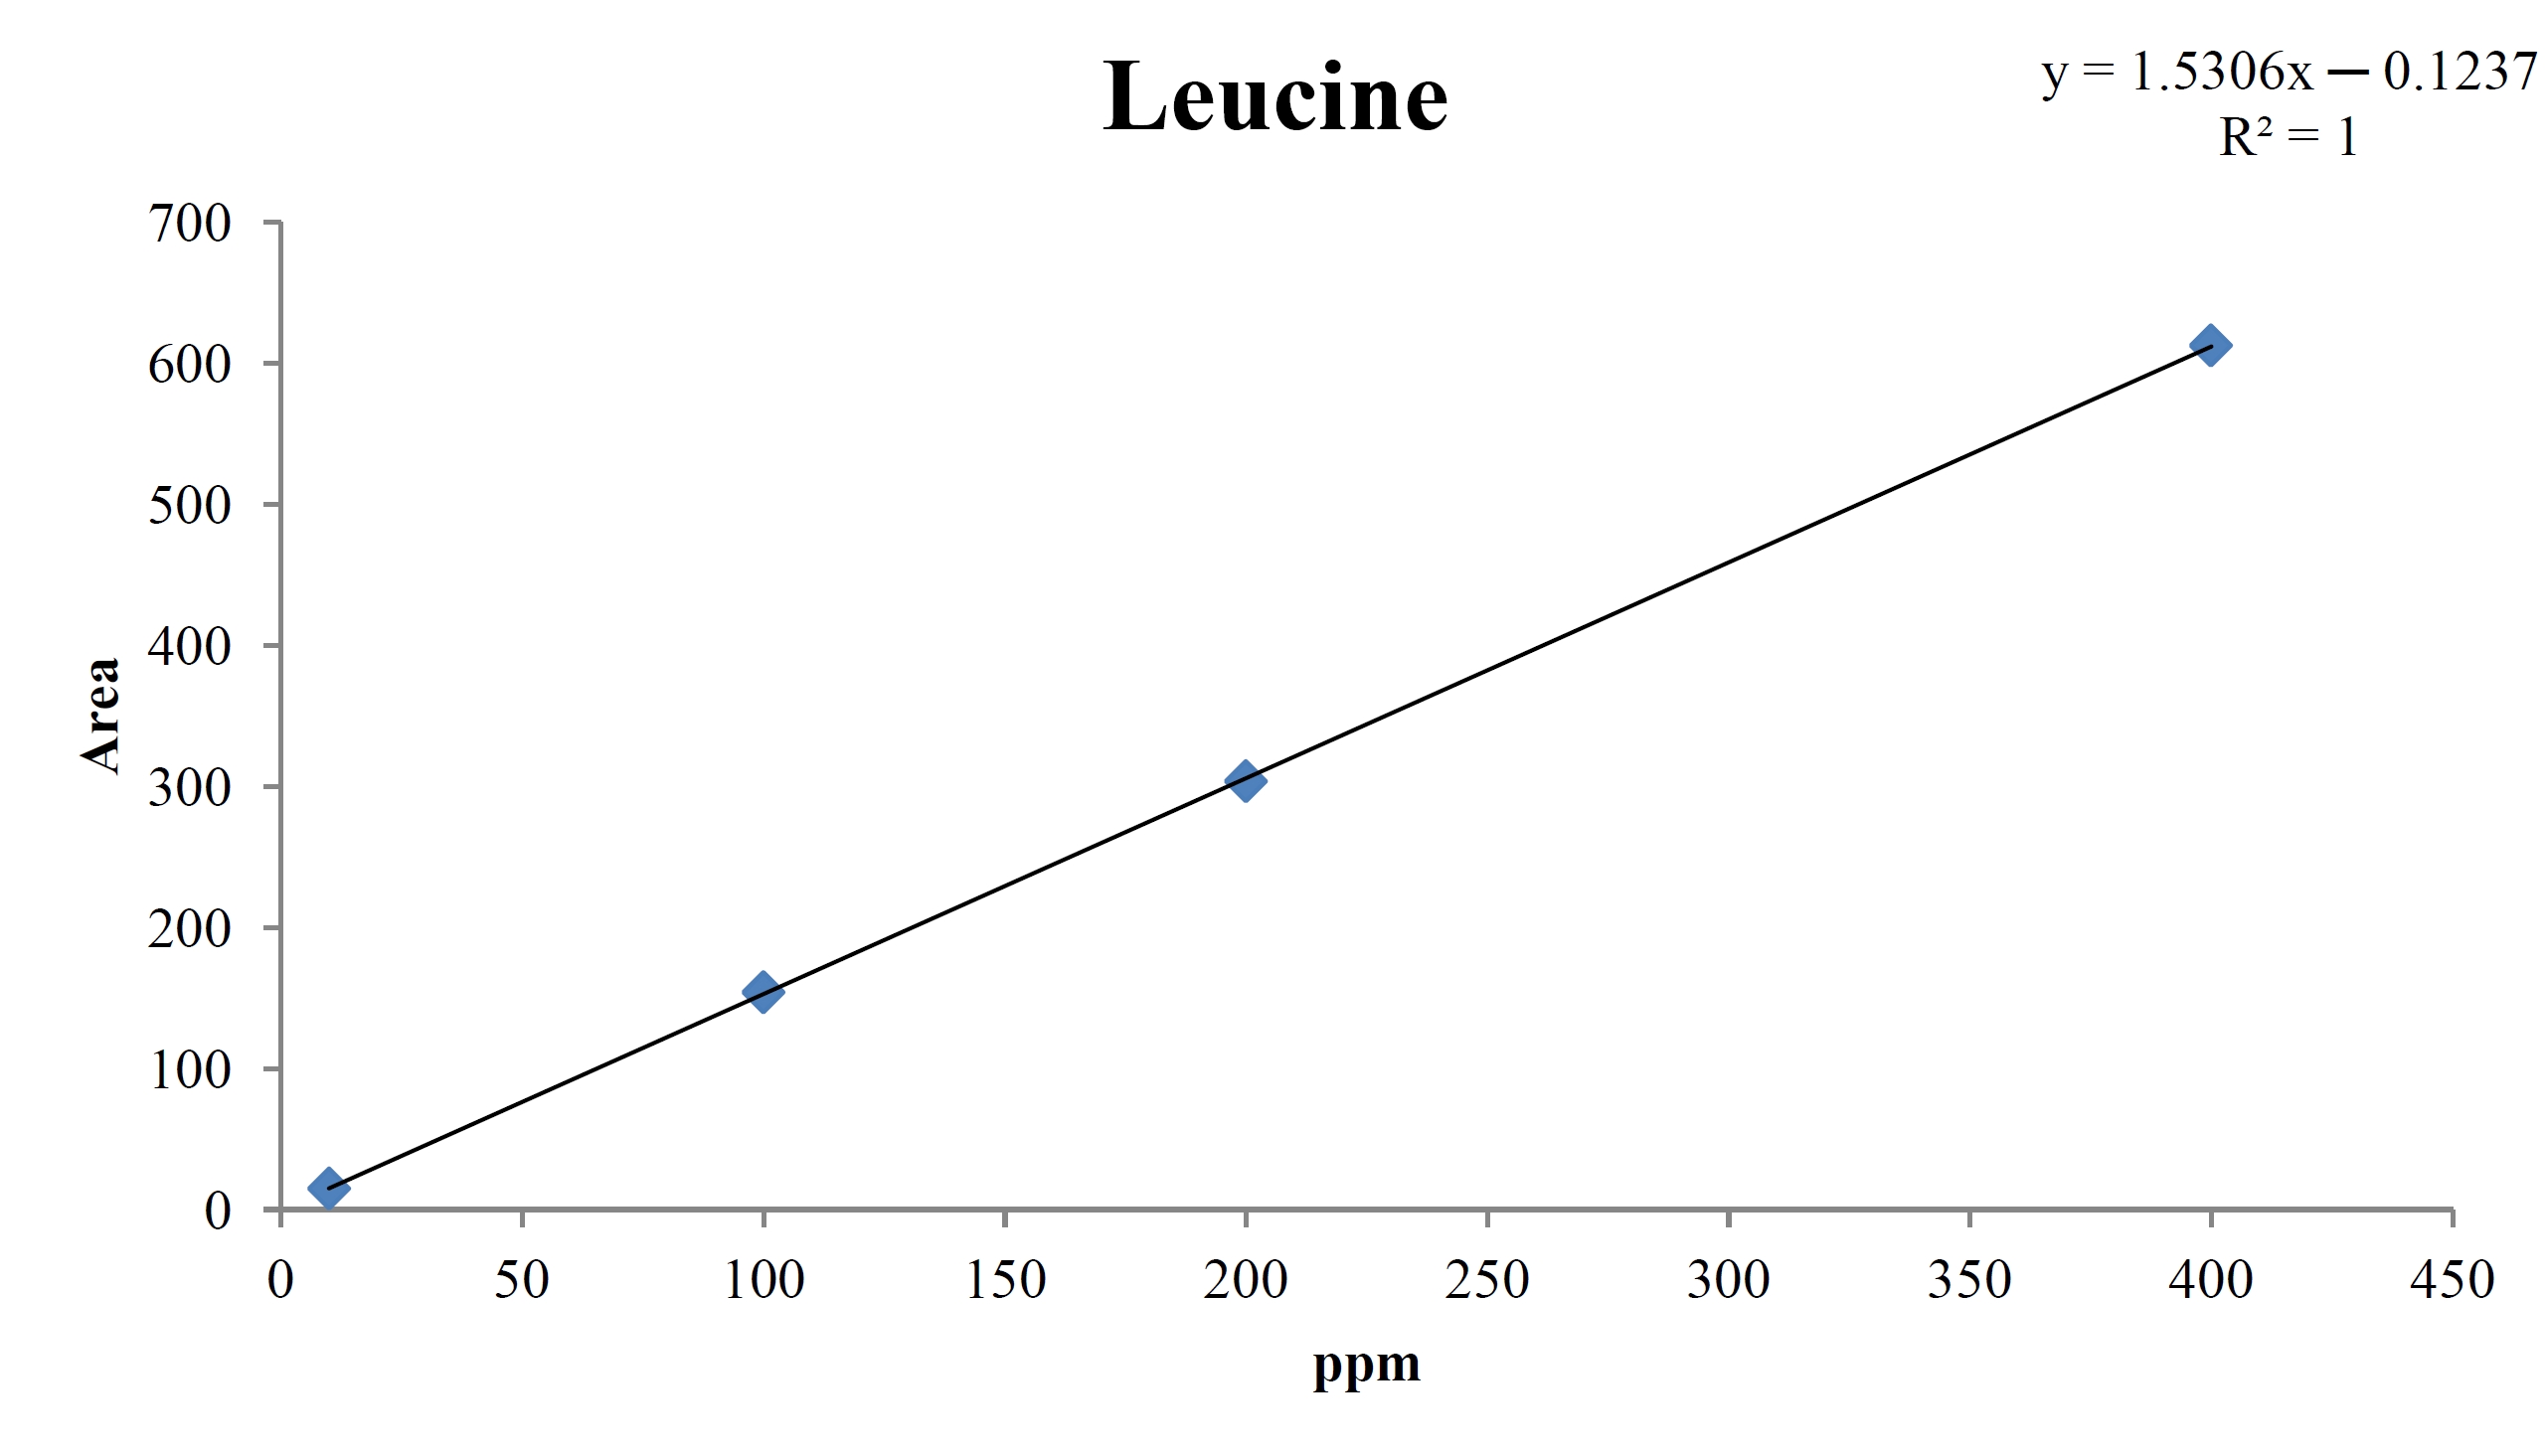 Analytical calibration curve of leucine STD for concentrations of 400, 200, 100, and 10 ppm.